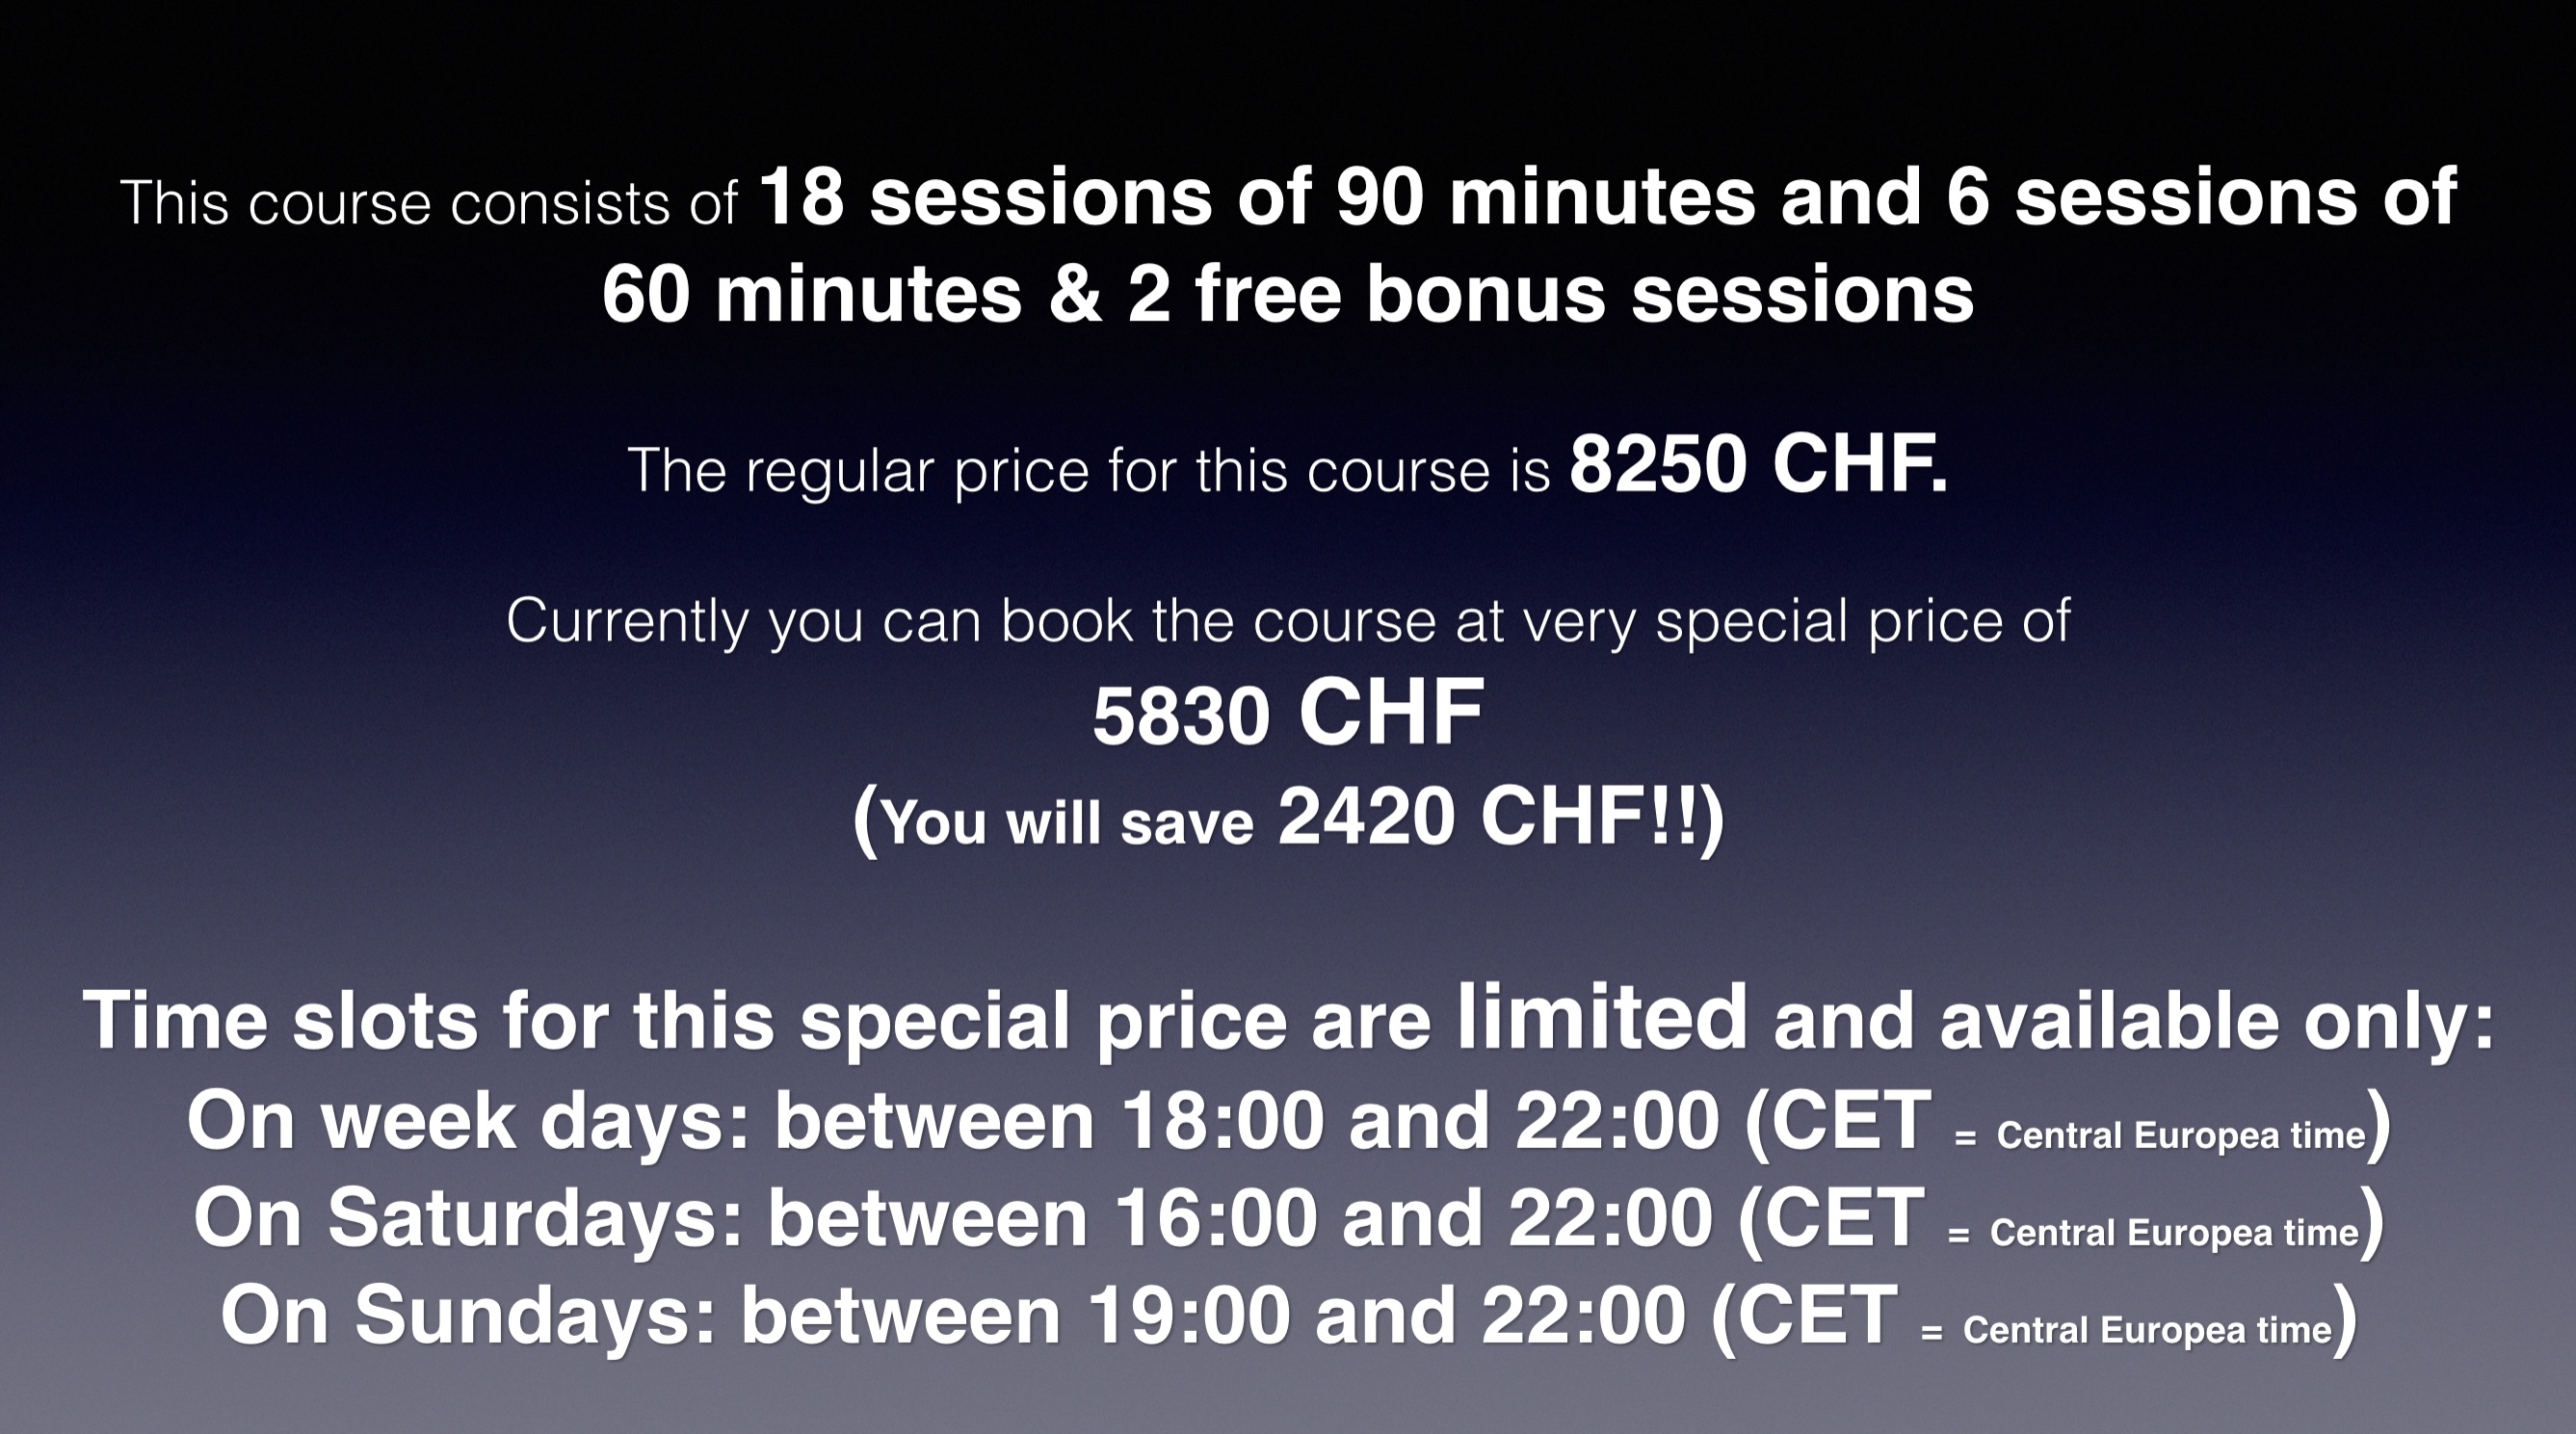 Very special price available for limited time slots